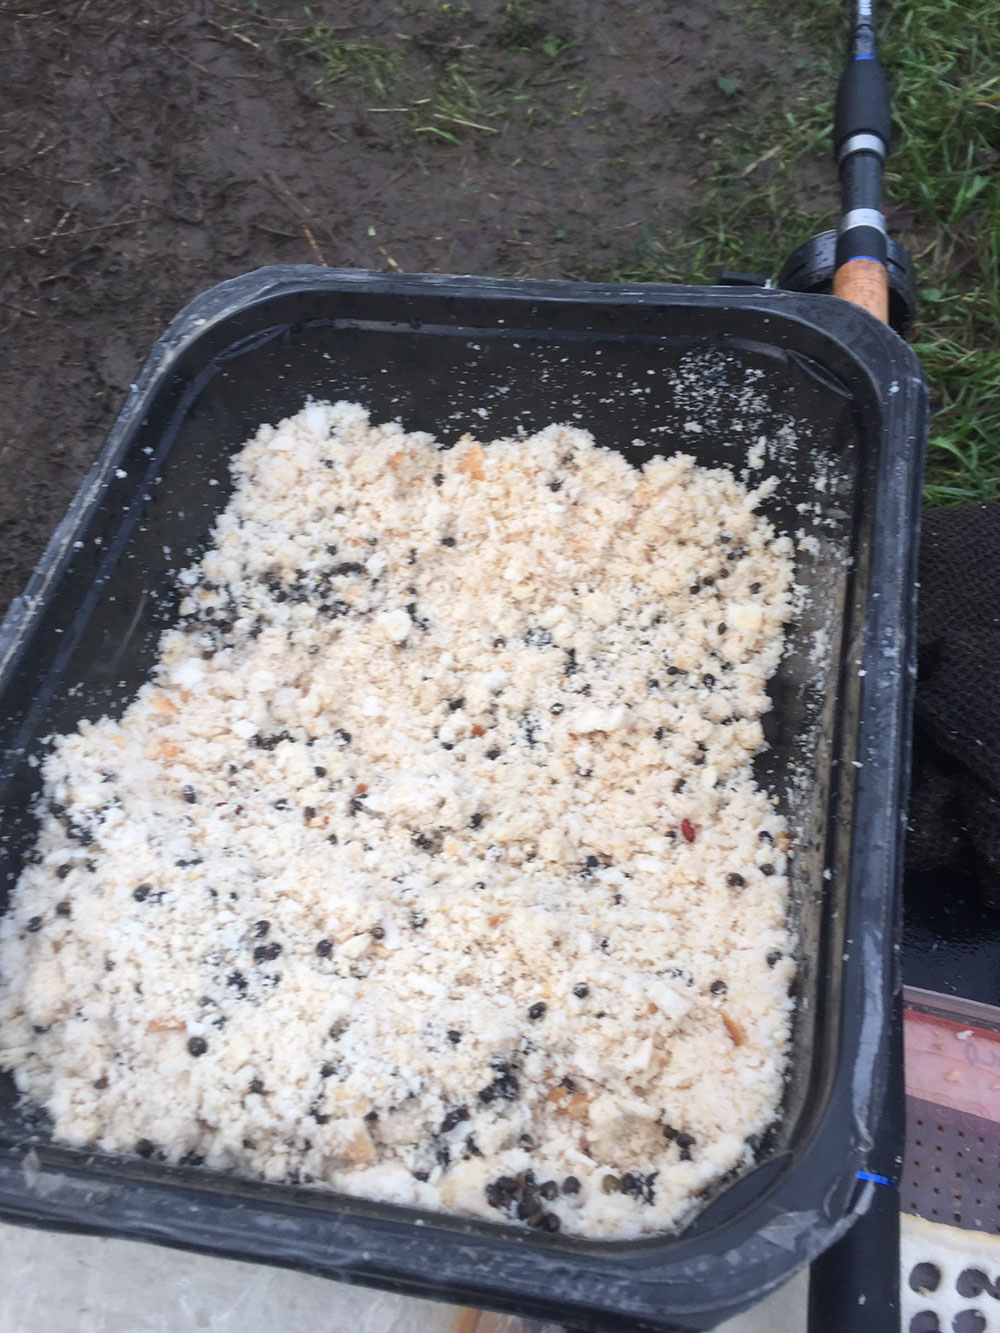 River Float Fishing with Punched Bread: Here is some Alan prepared earlier! A typical liquidised bread groundbait mix for the river incorporating some MPW Spiced Punch Crumb and a generous helping of cooked and drained hemp. What self-respecting roach, dace or chub could resist it?